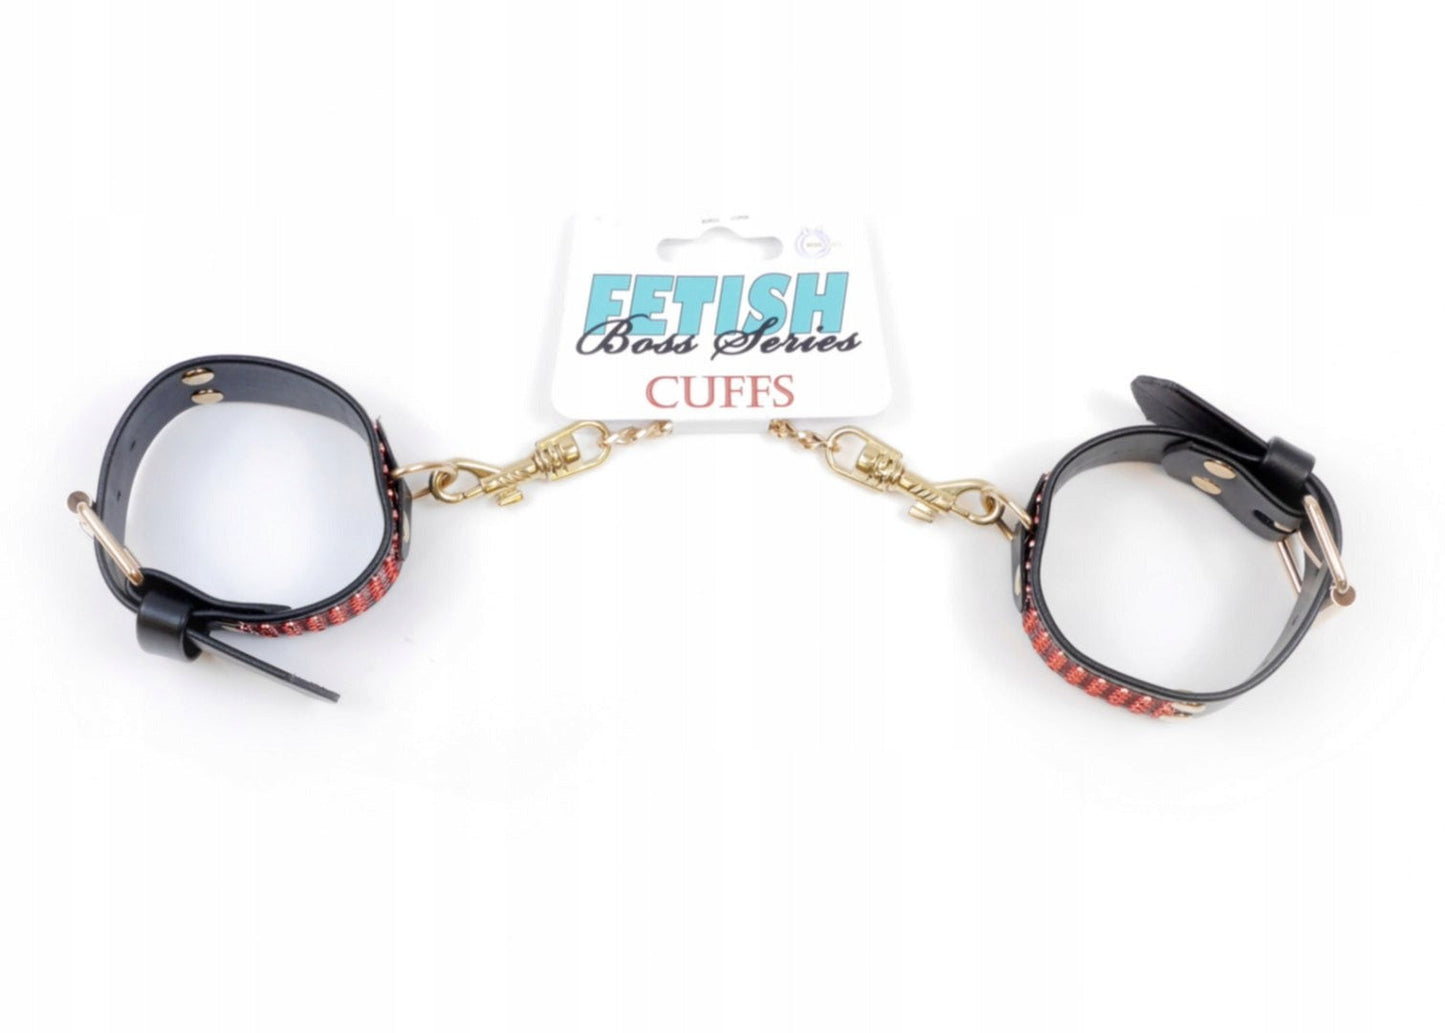 Bossoftoys - 33-00109 - Handcuffs with cristals - Fetish Boss Series - 3 cm - Red